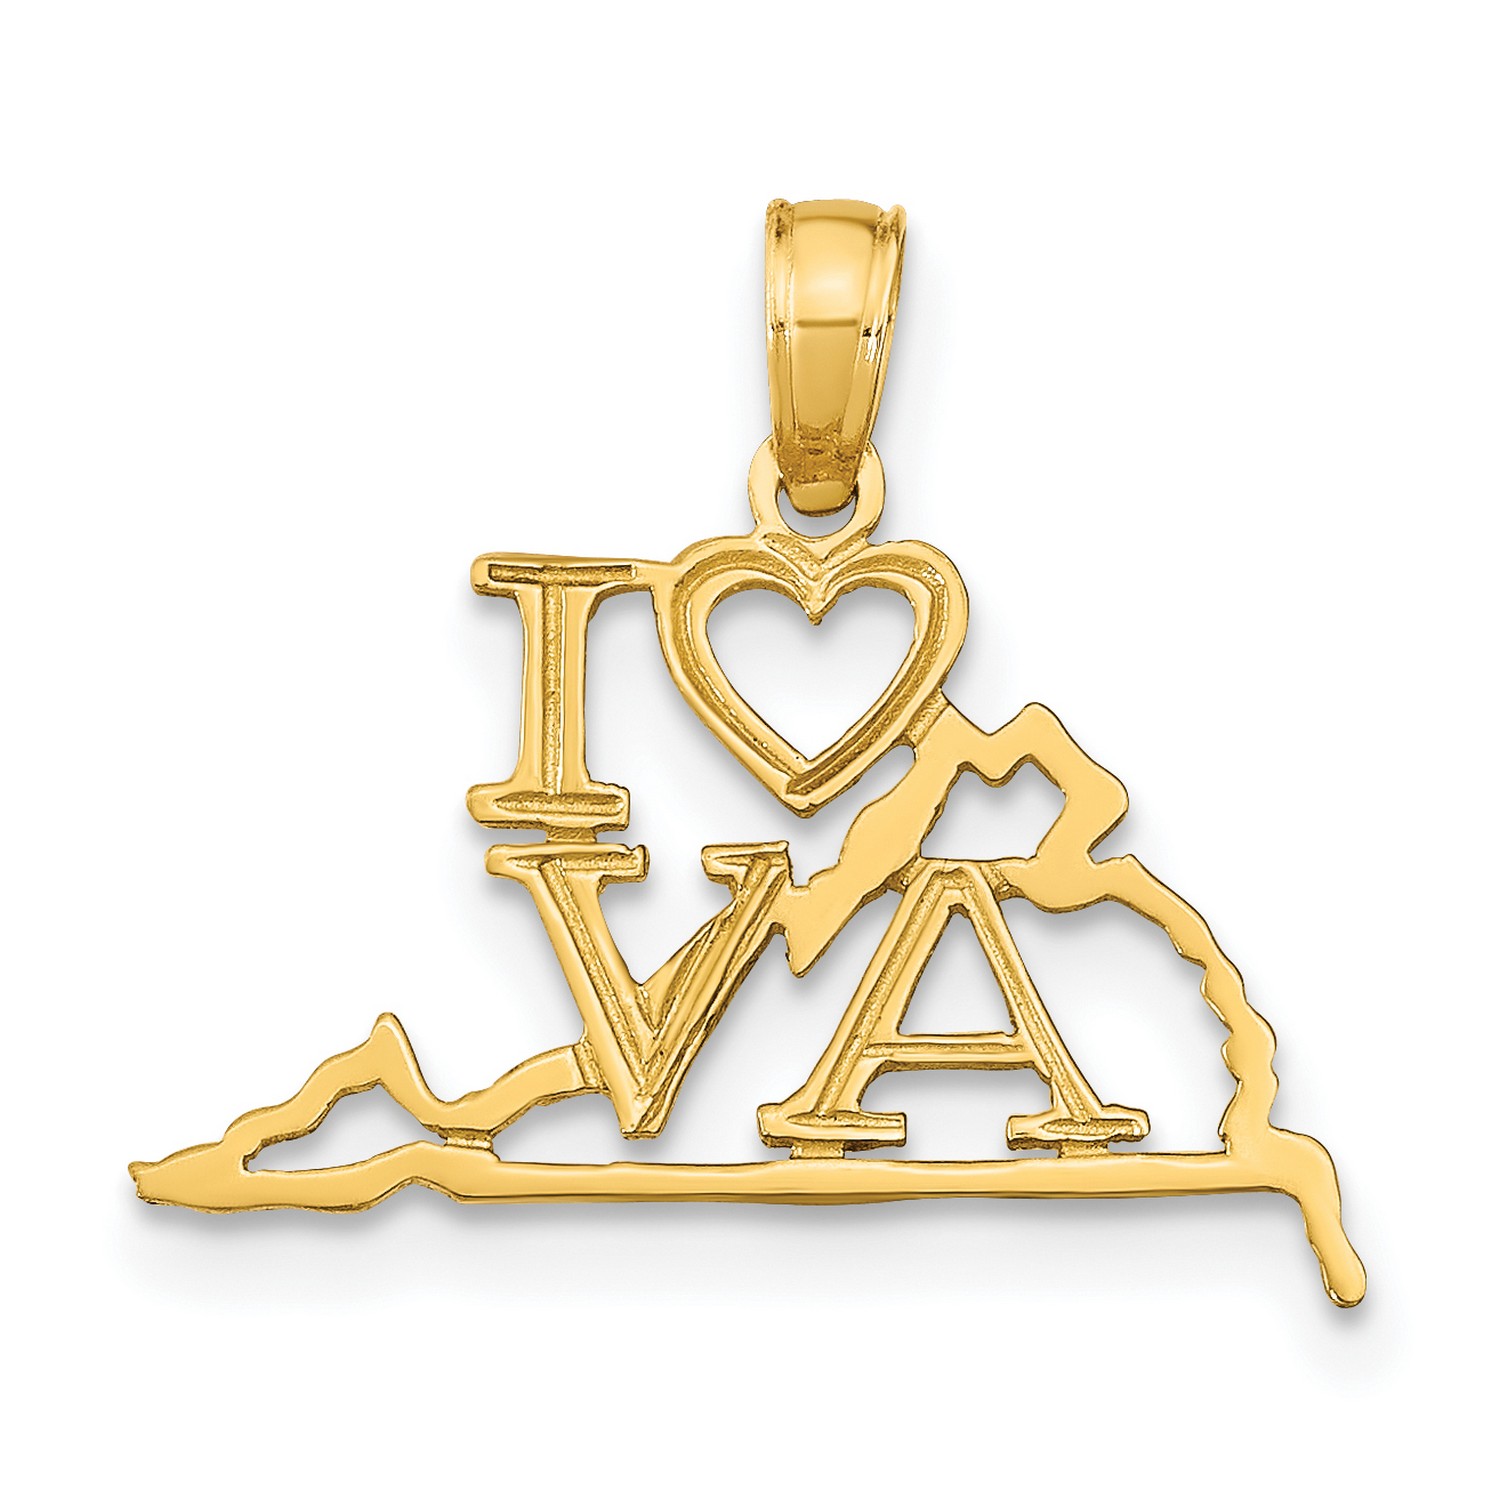 I Love Virginia VA Letters with Heart on State Shaped Pendant in Real